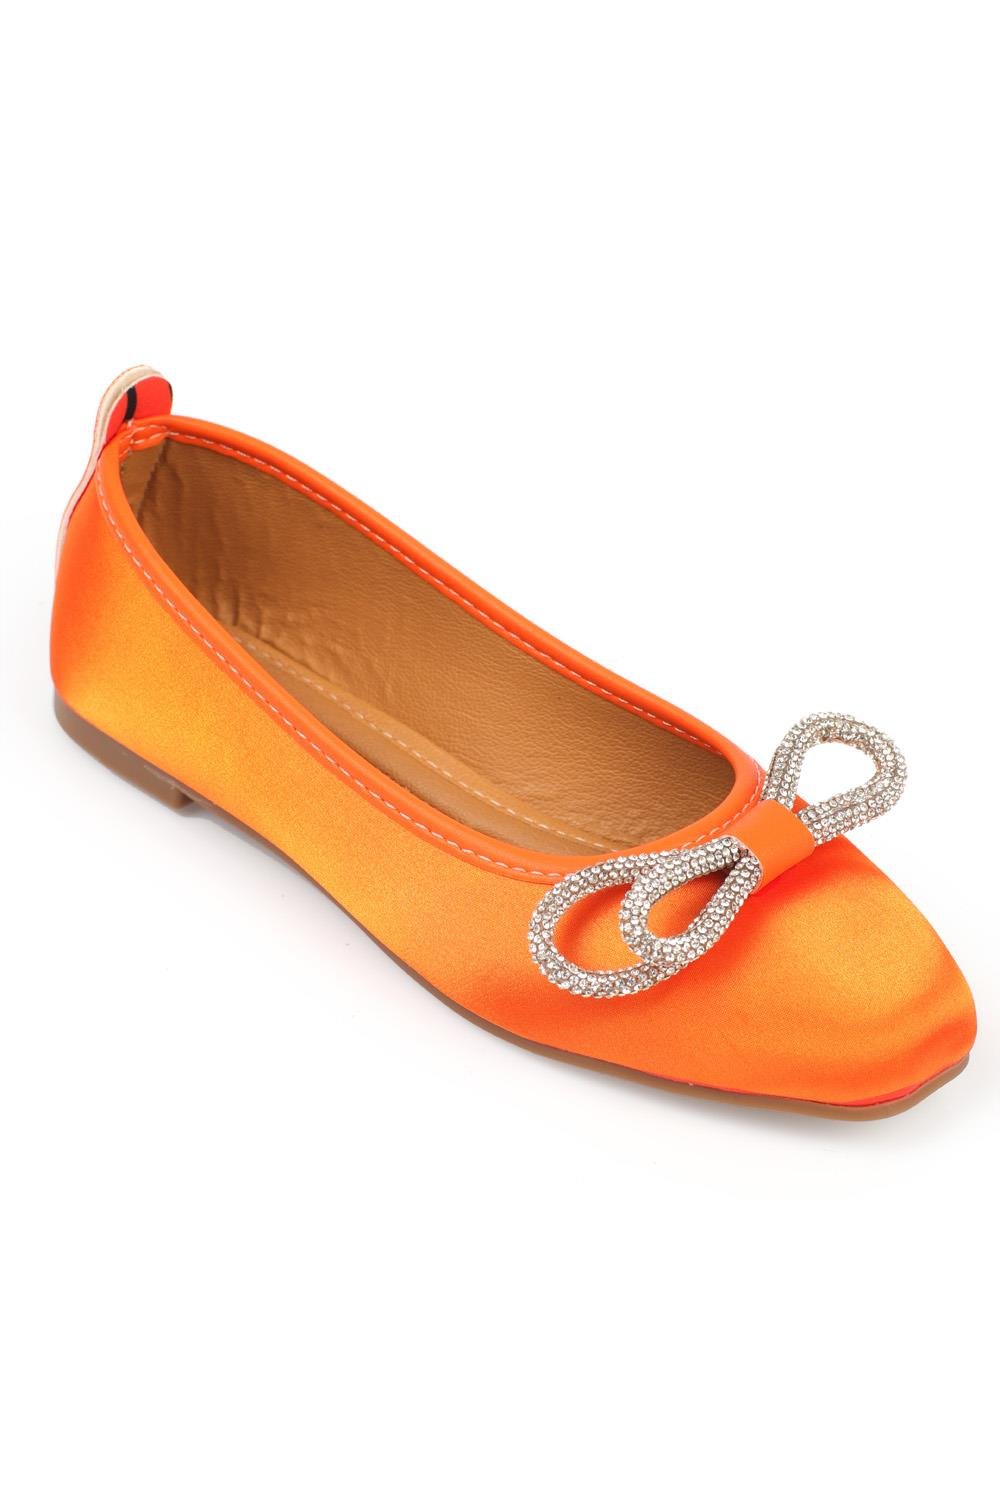 TOWED22 Womens Flat Shoes,Womens Baden Ballet Flats Comfortable Everyday  Ballet Shoes for Women,Orange 